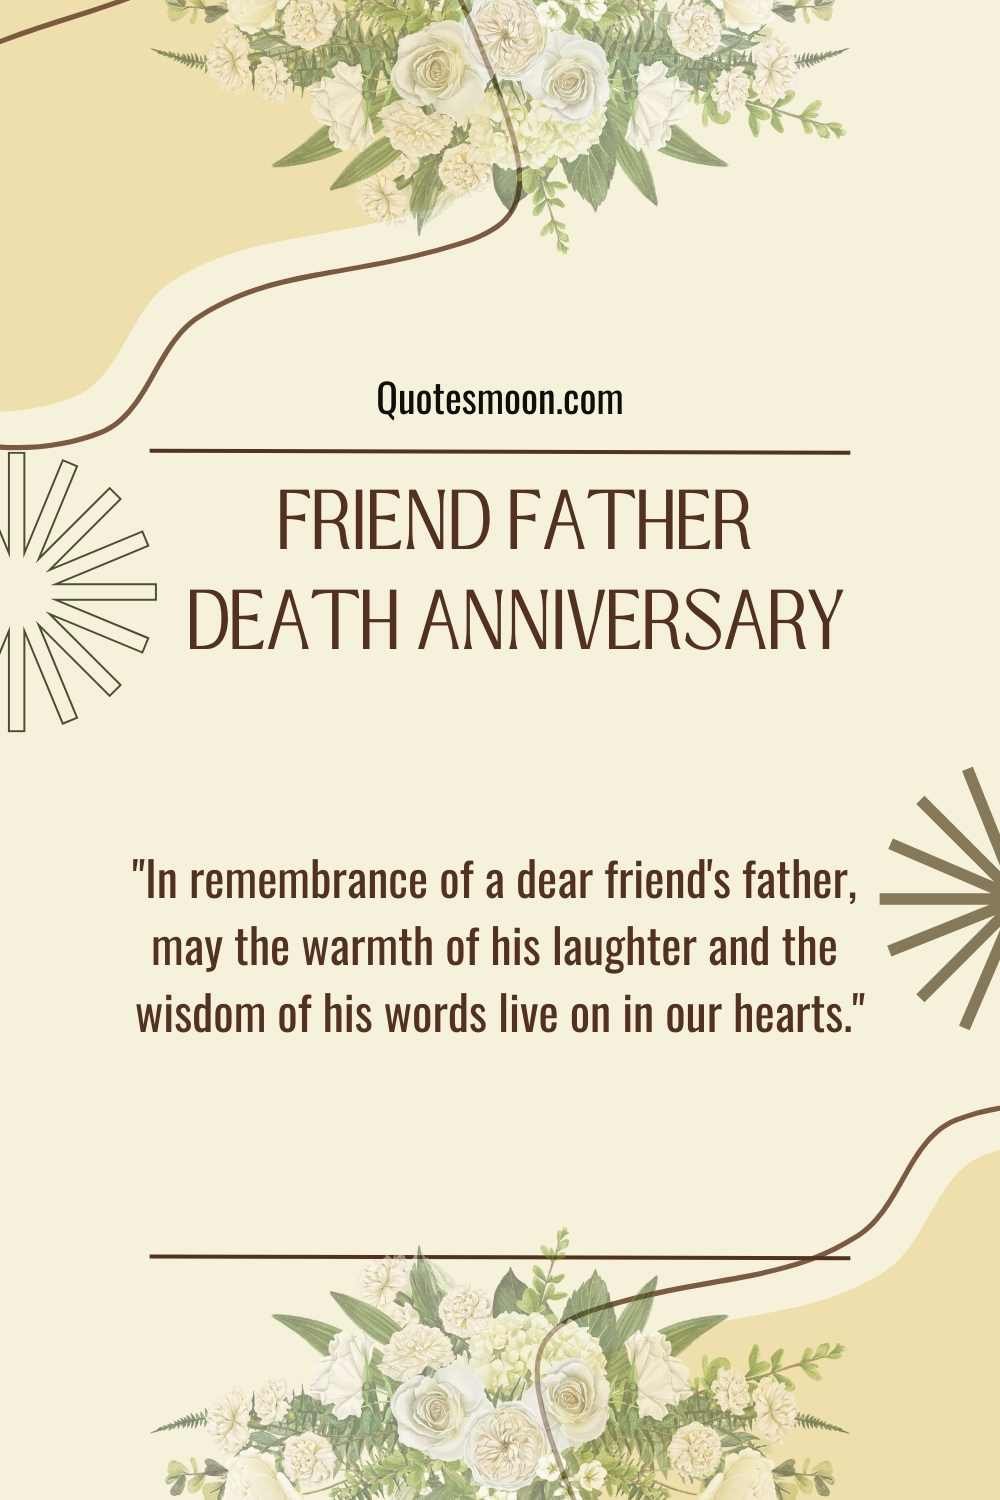 Death Anniversary Quotes For Friend Father